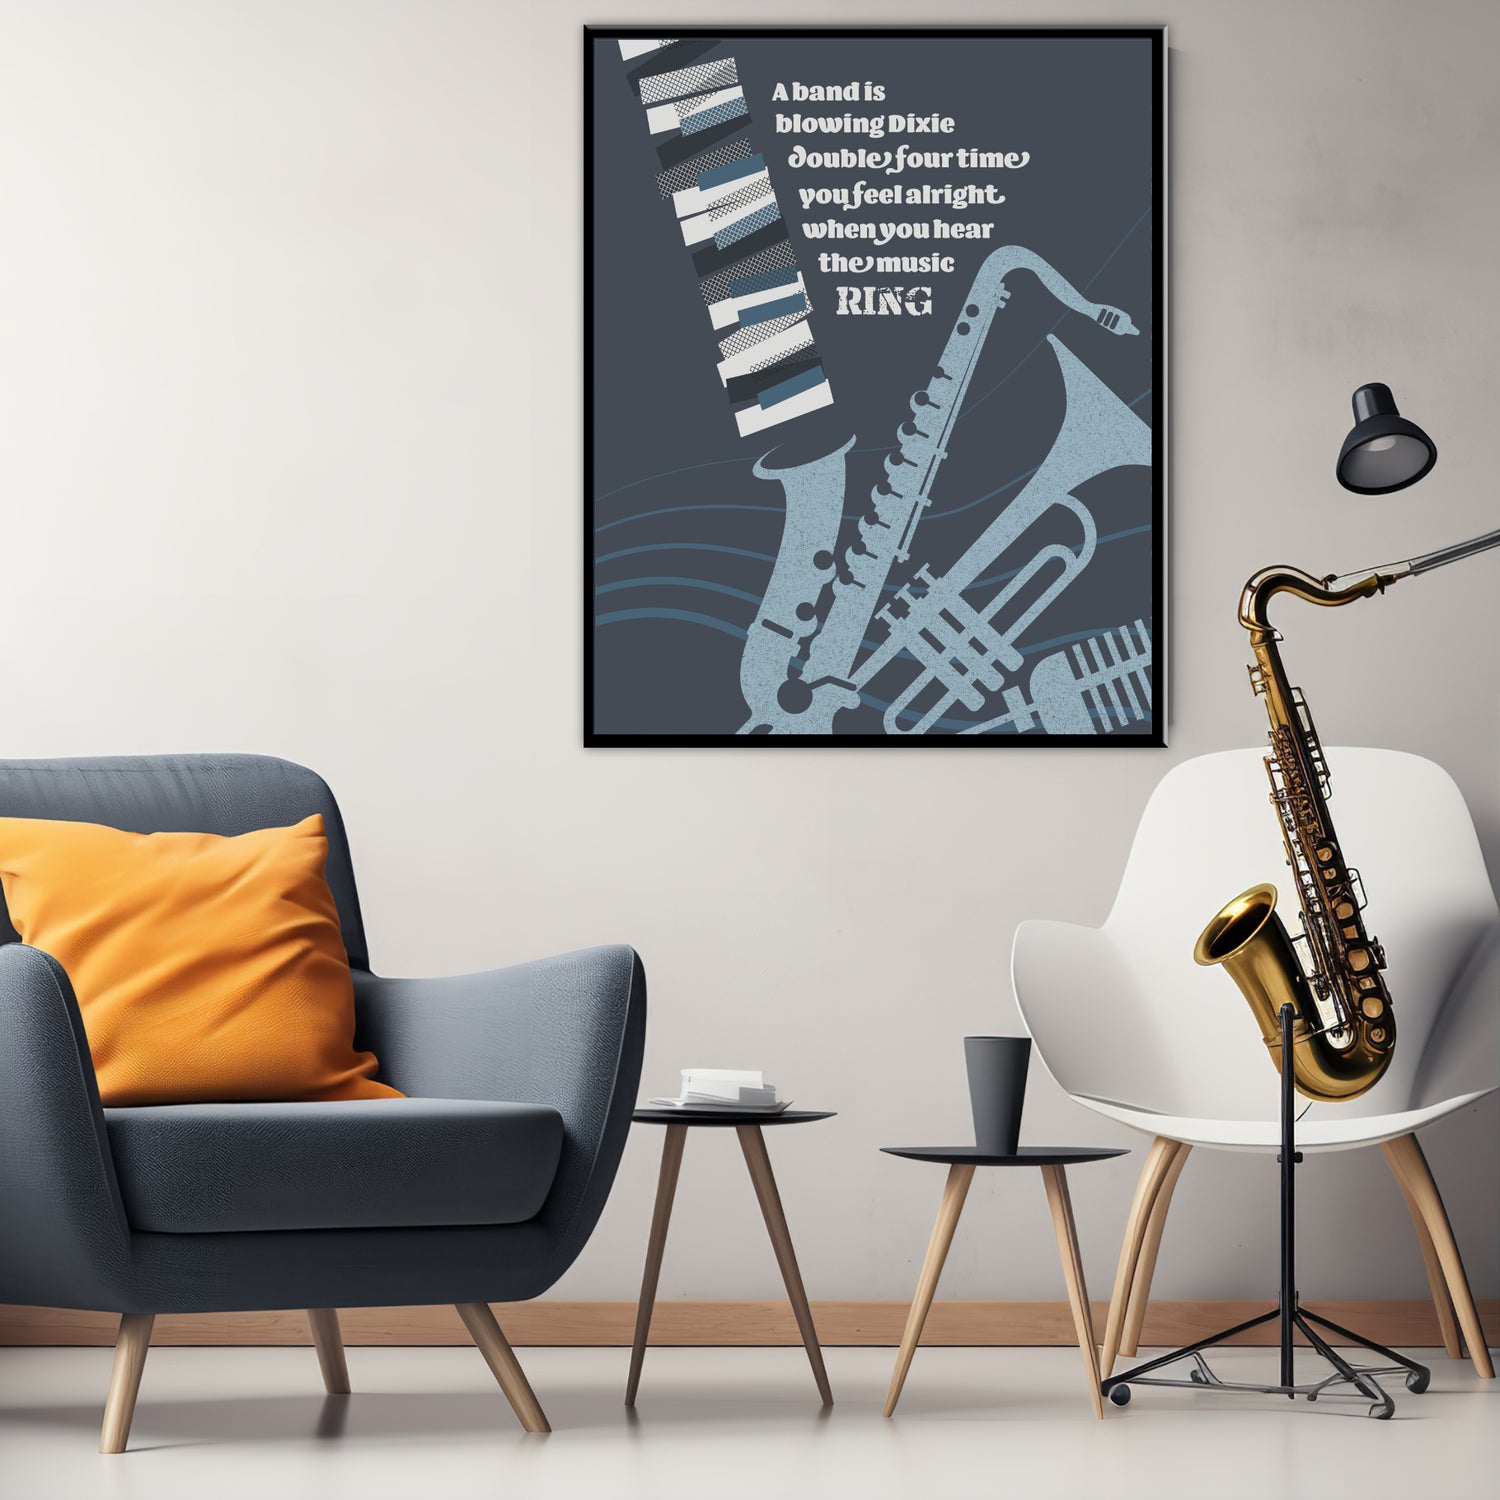 Sultans of Swing by Dire Straits Song Lyrics Art Music Poster Wall Decor